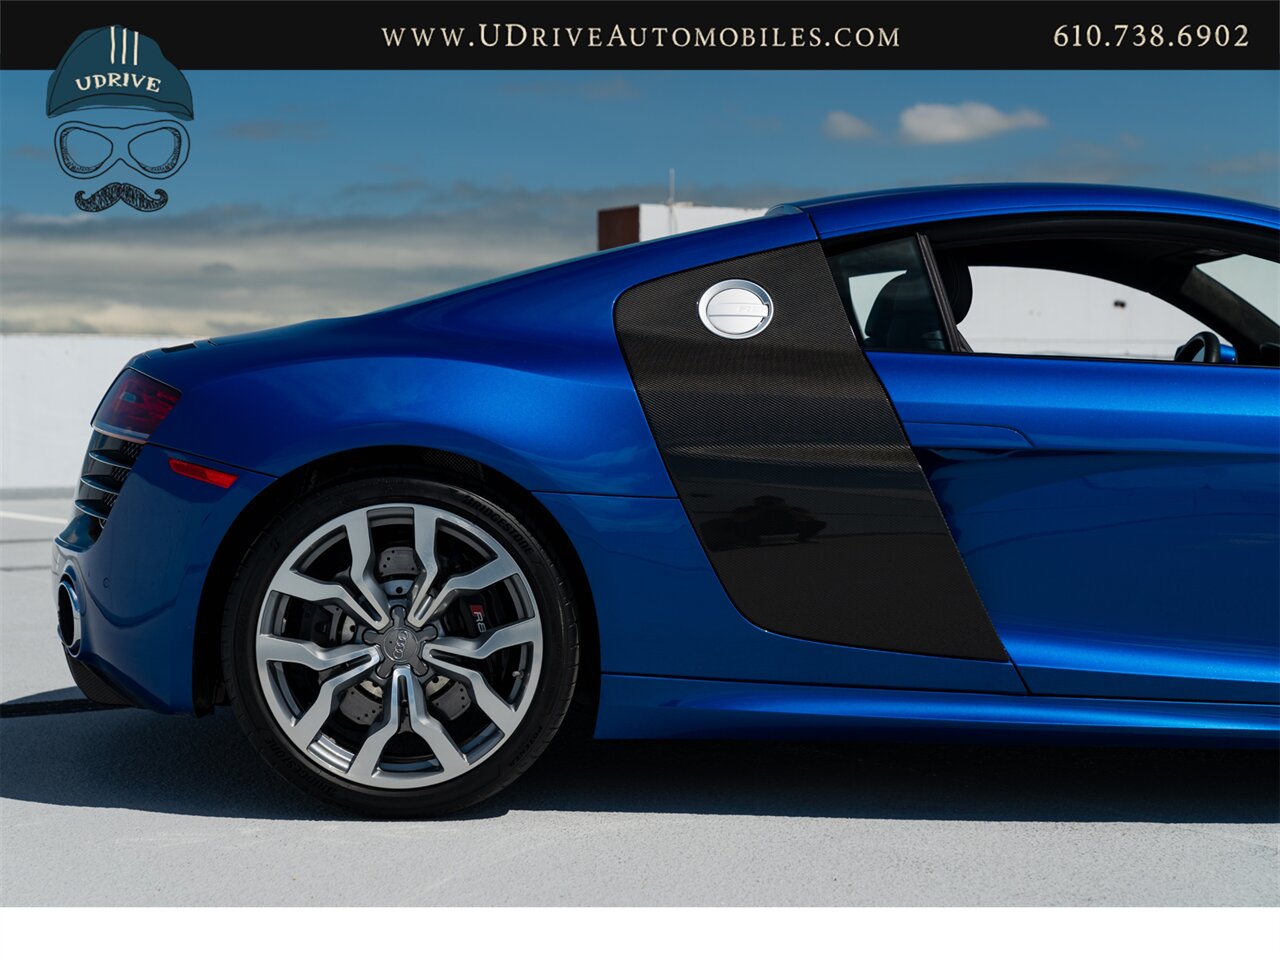 2015 Audi R8 5.2 V10 Quattro 6 Speed Manual 10k Miles  Diamond Stitched Leather 1 of 2 - Photo 17 - West Chester, PA 19382